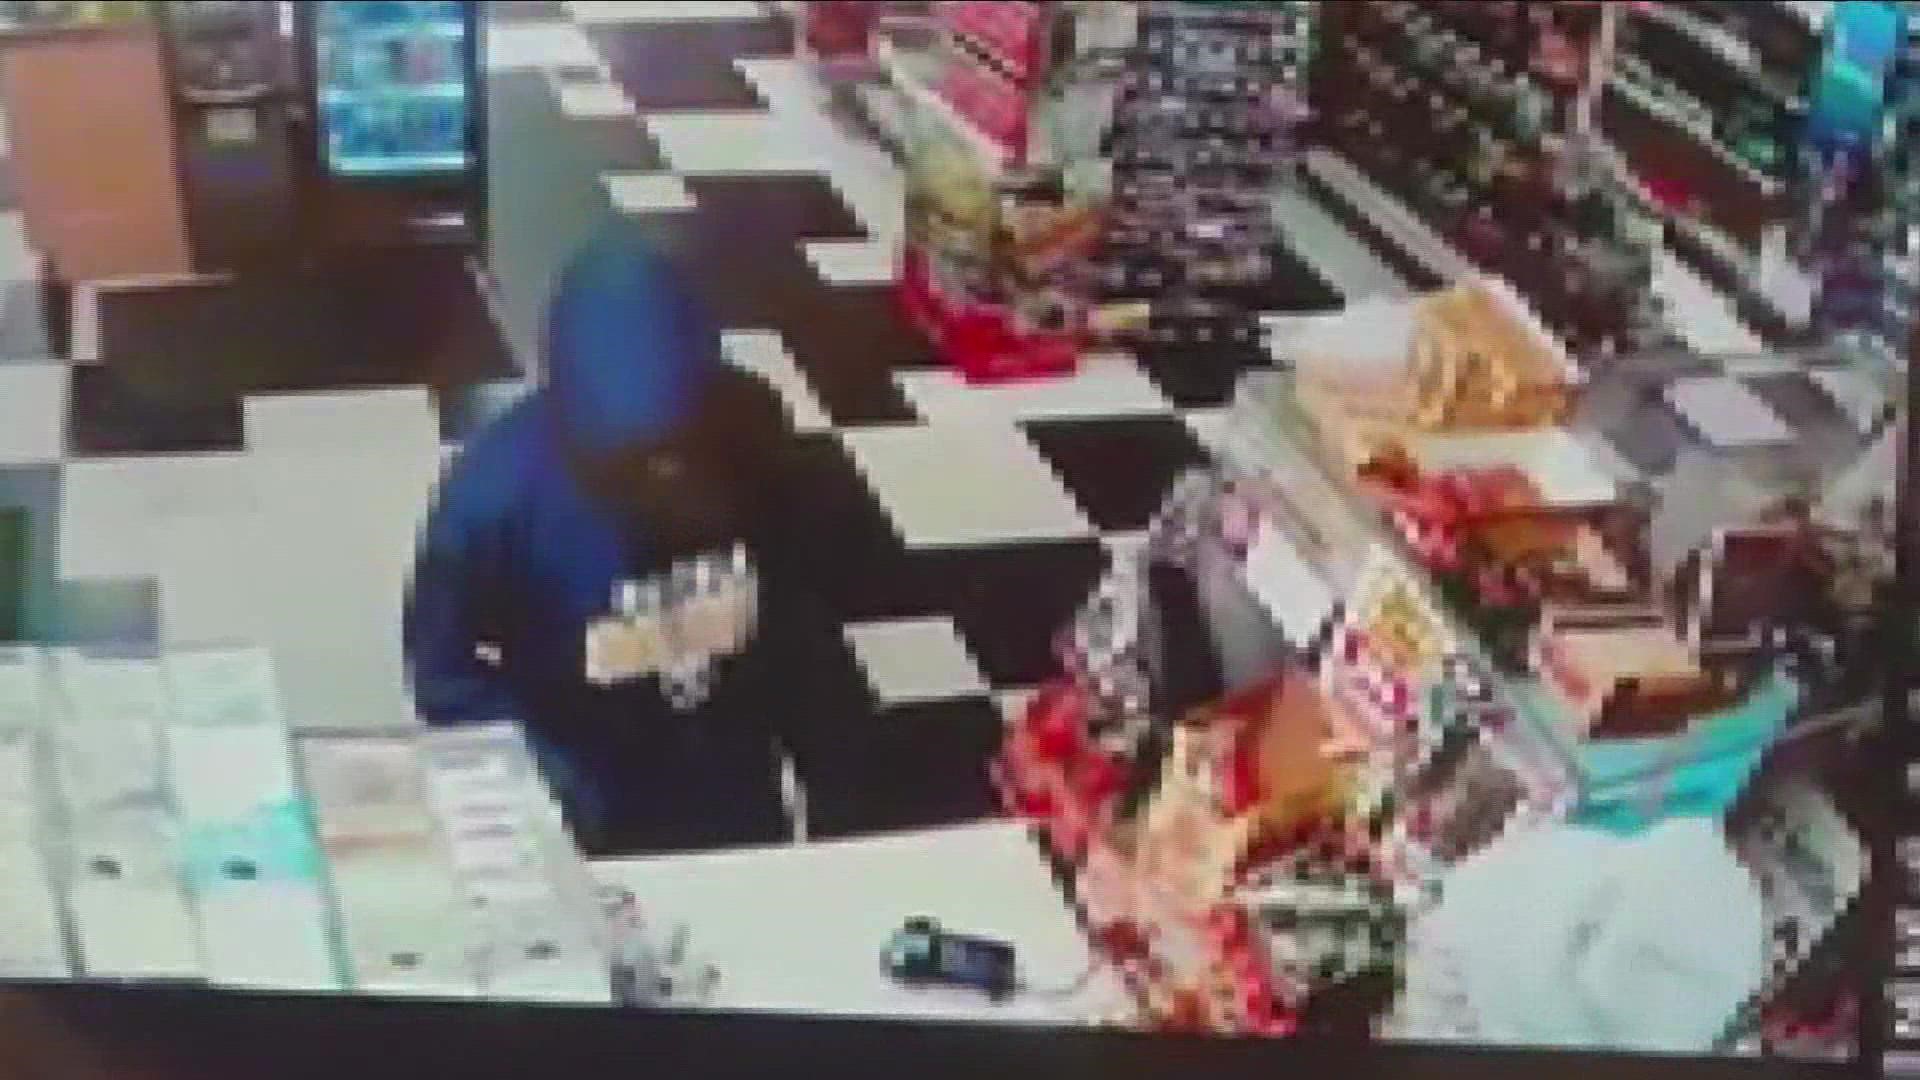 Attempted robbery at Allentown Eatz